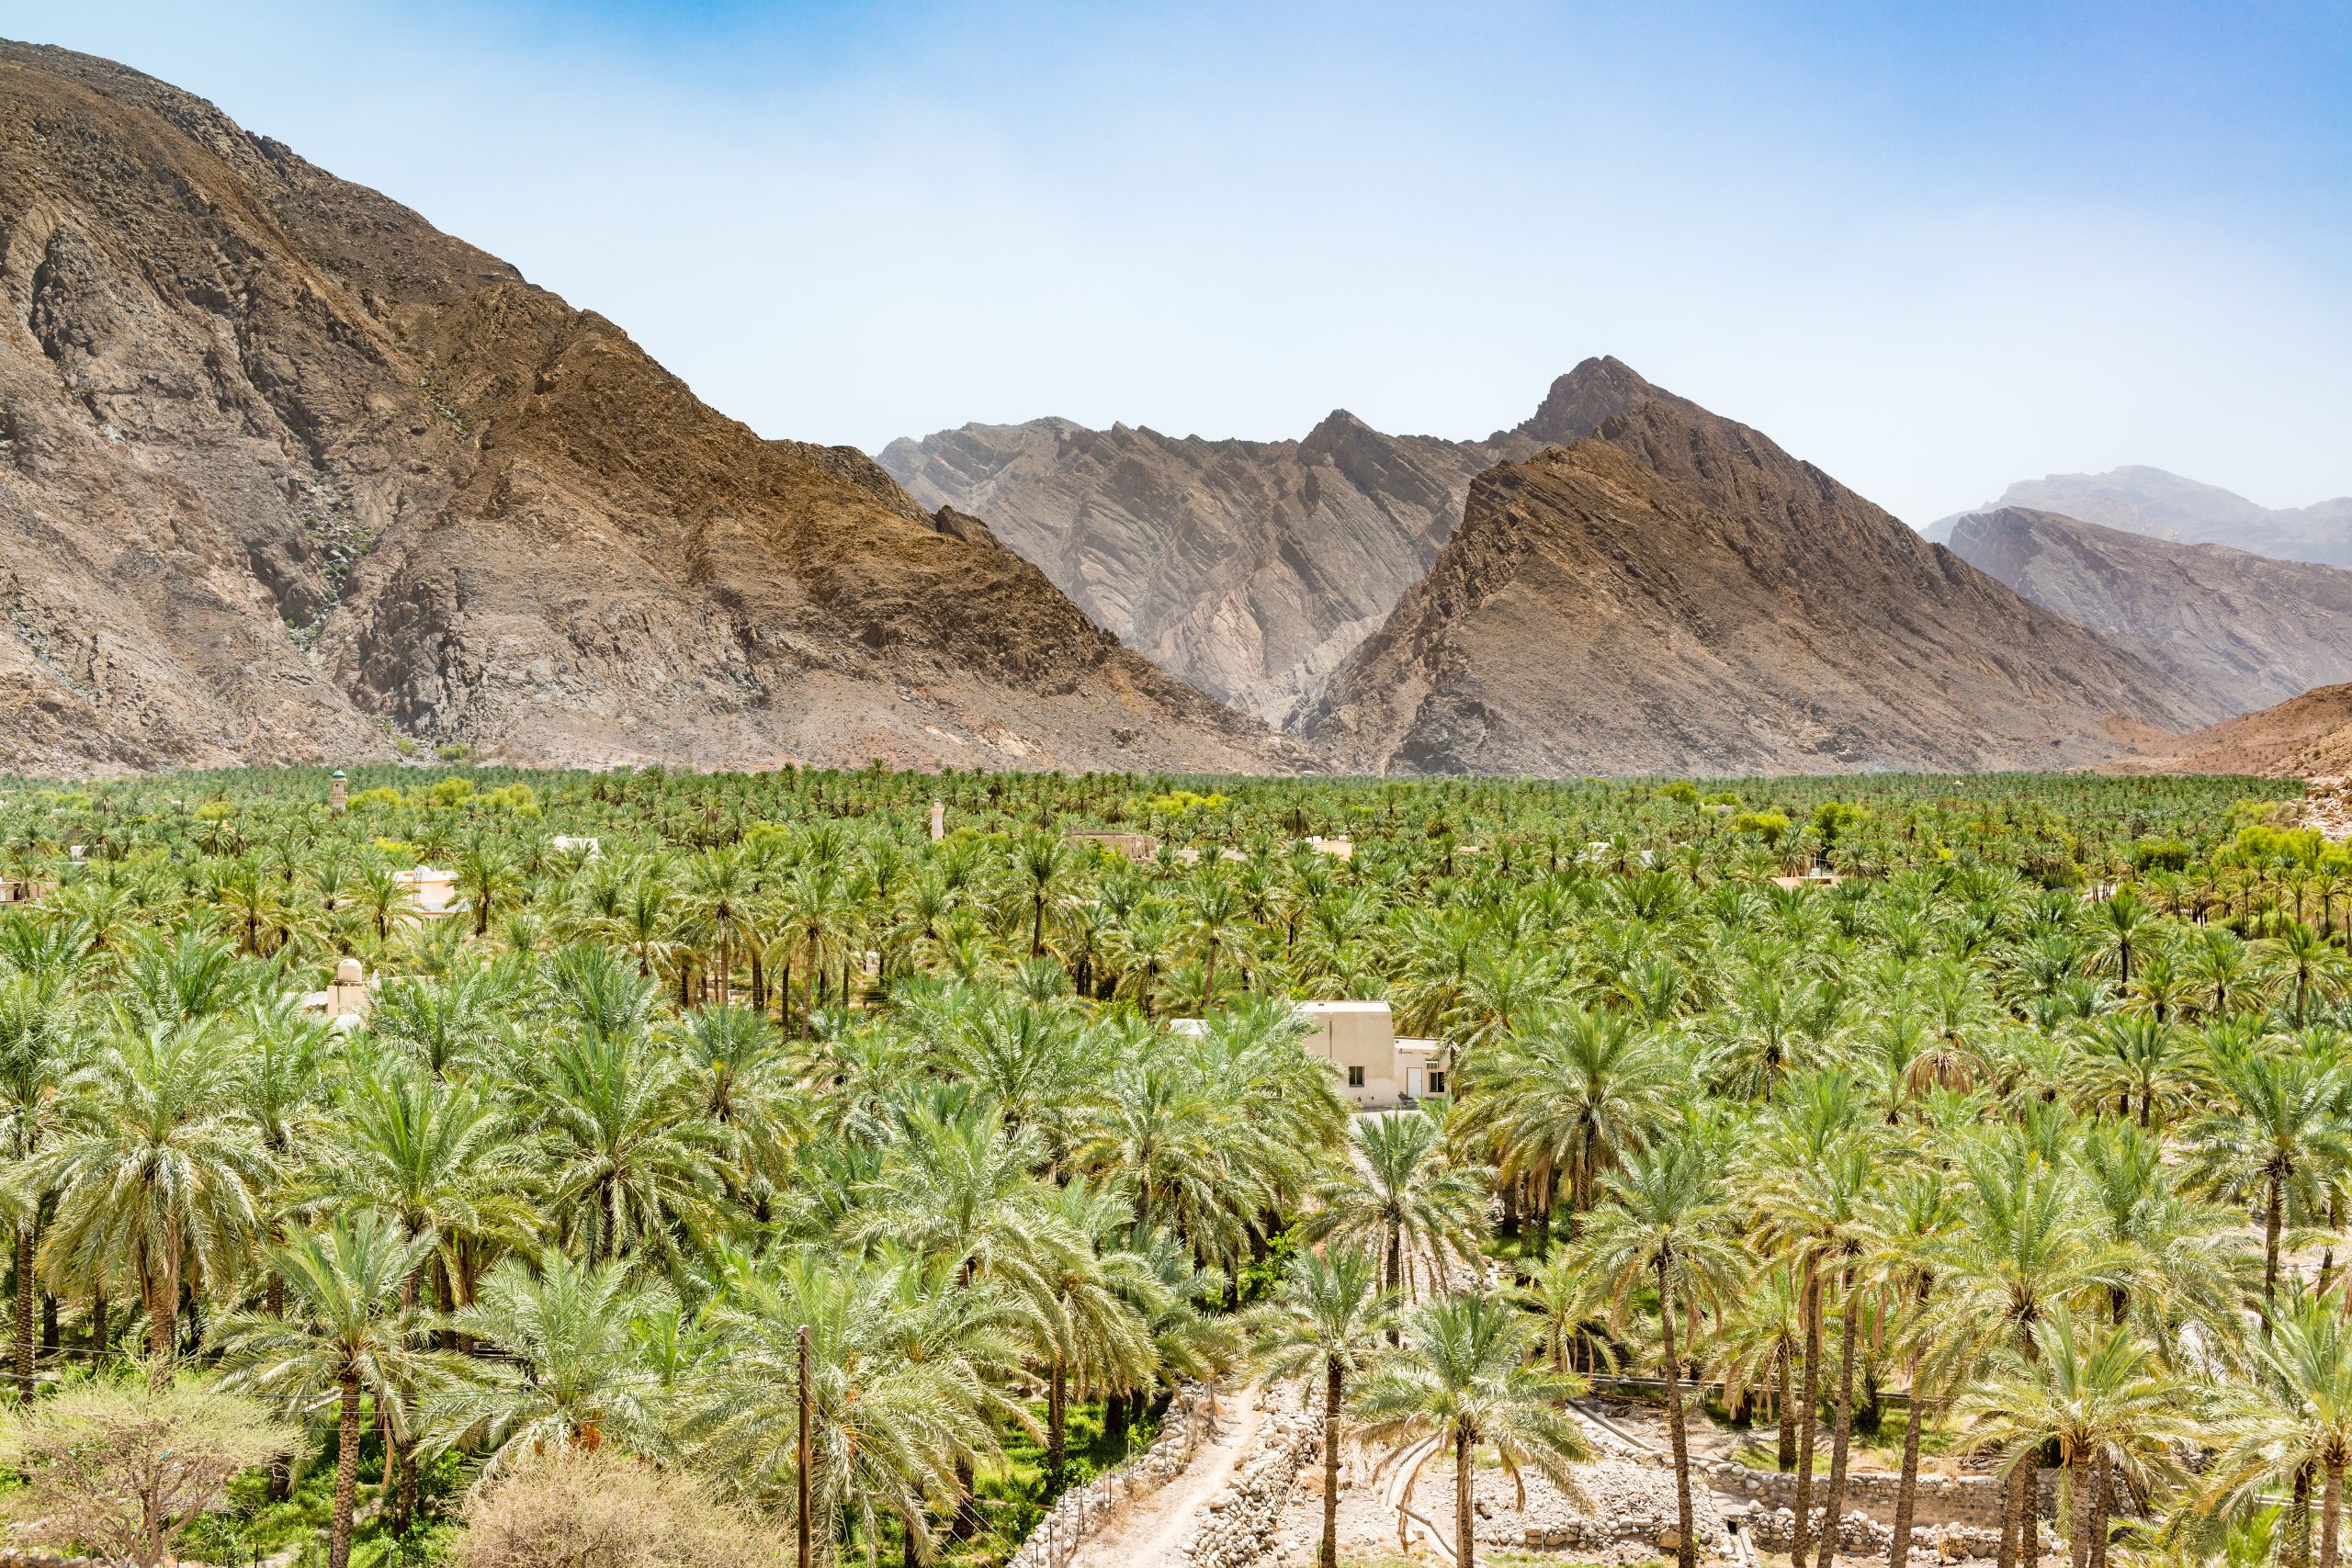 Palm trees growing in a desert land